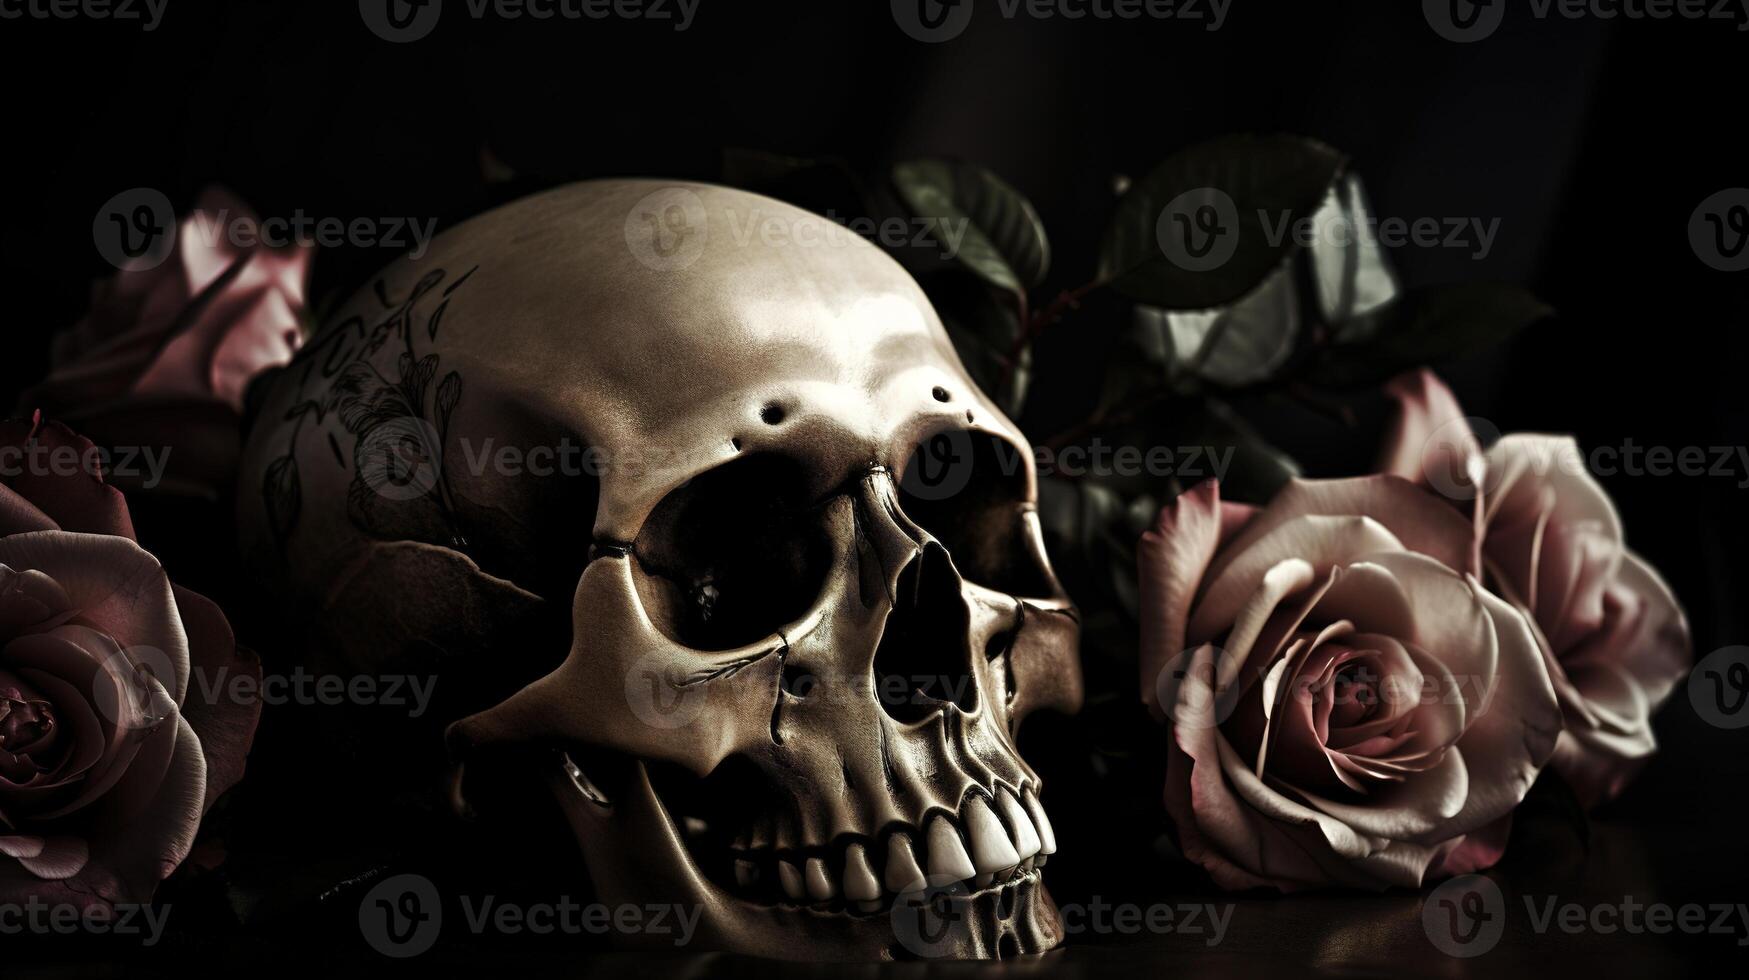 Skull with roses. Human Skull in Beautiful Flowers. Halloween images. Day of the Dead. photo